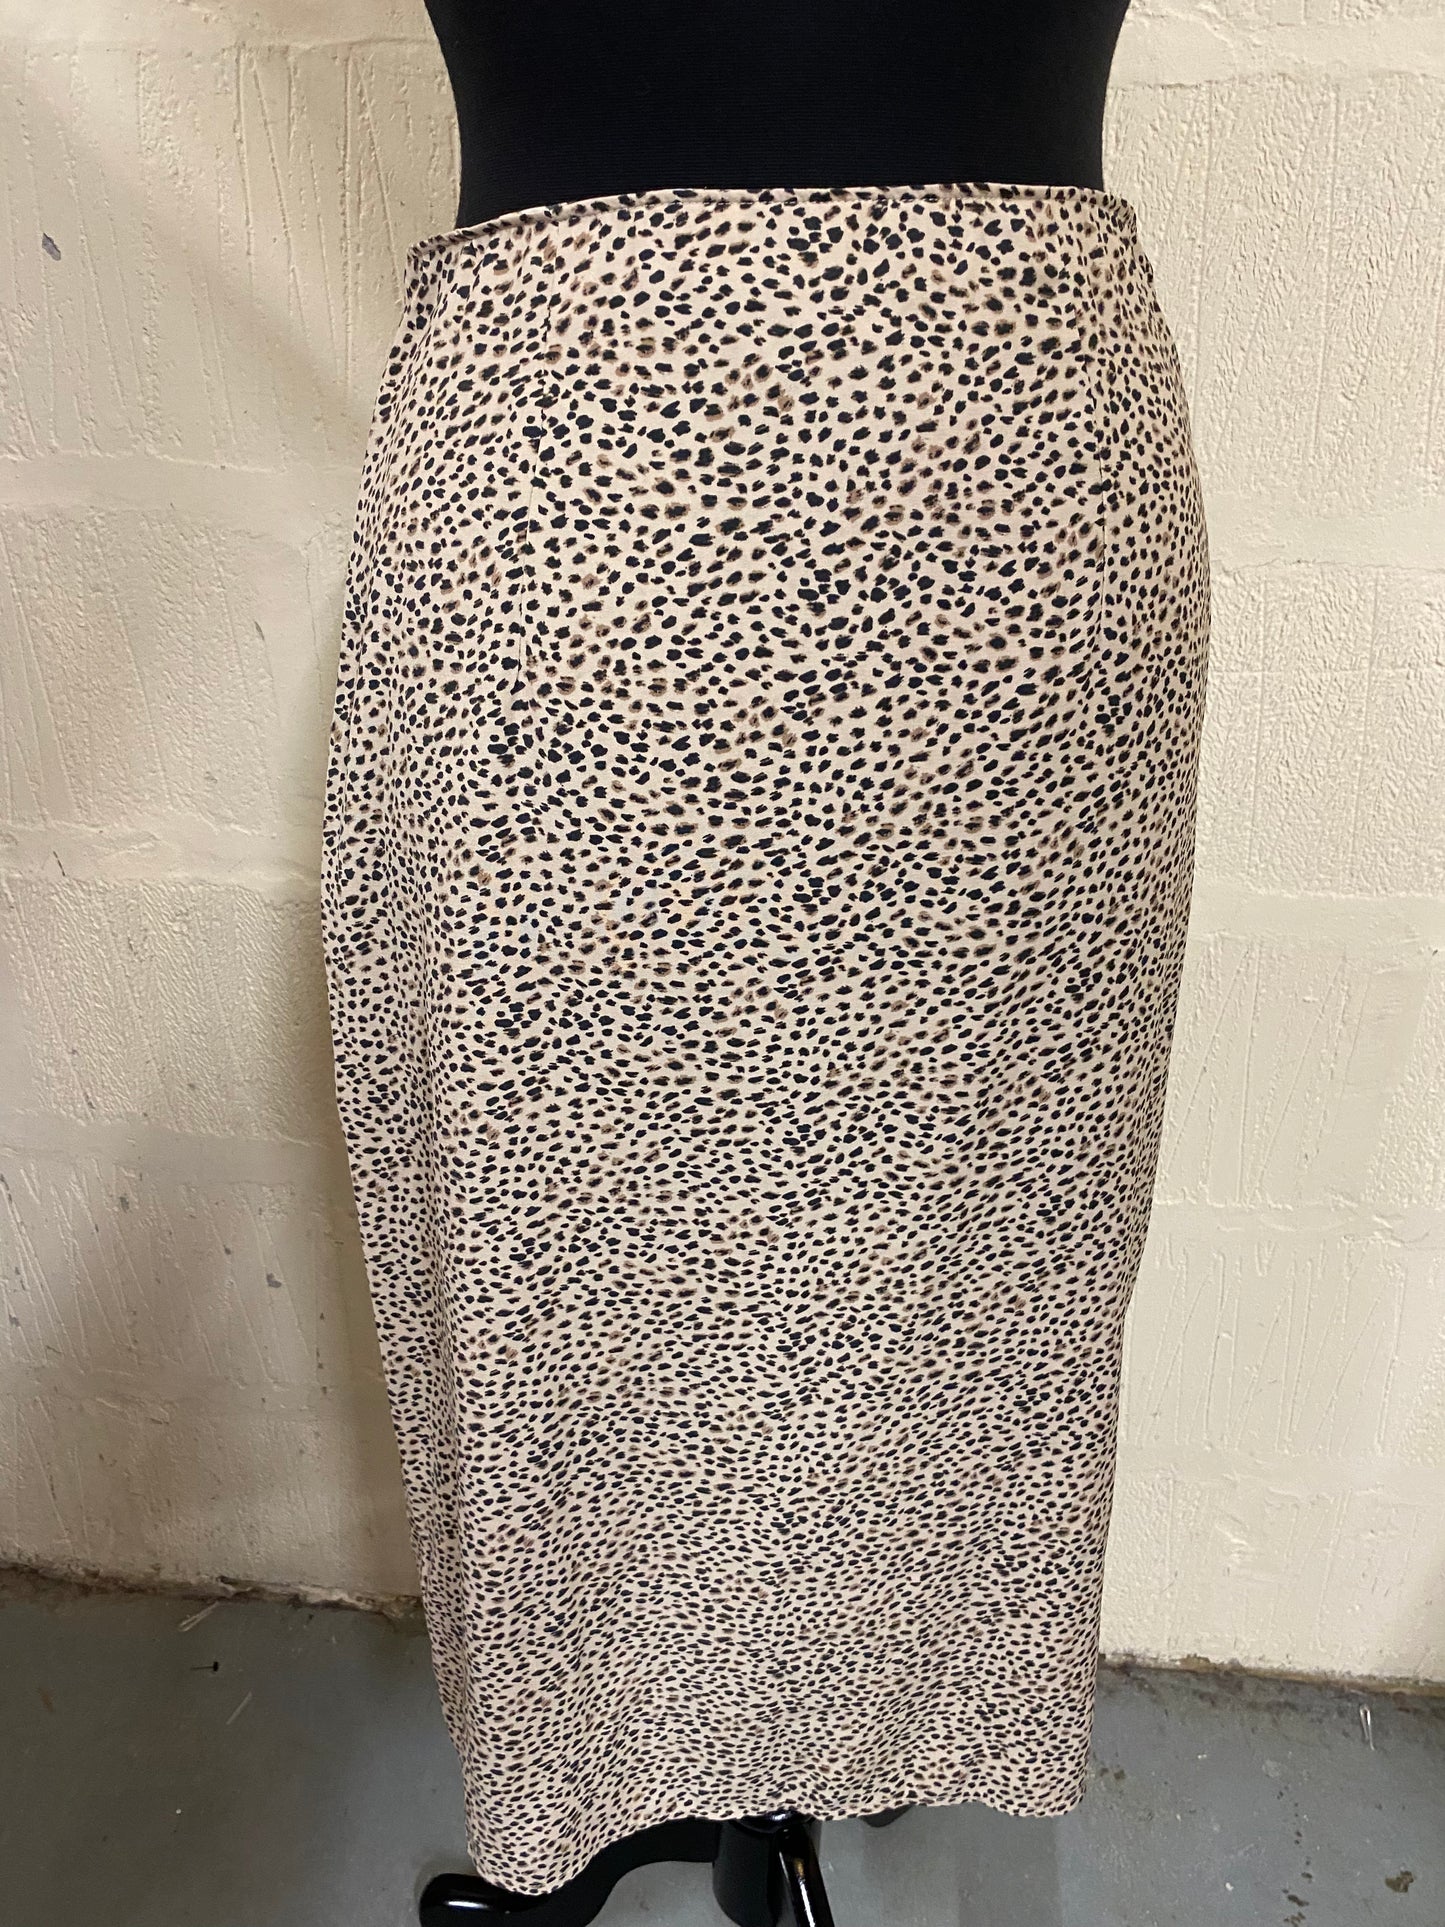 Abercrombie and Fitch Leopard Print Midi Skirt Size 10